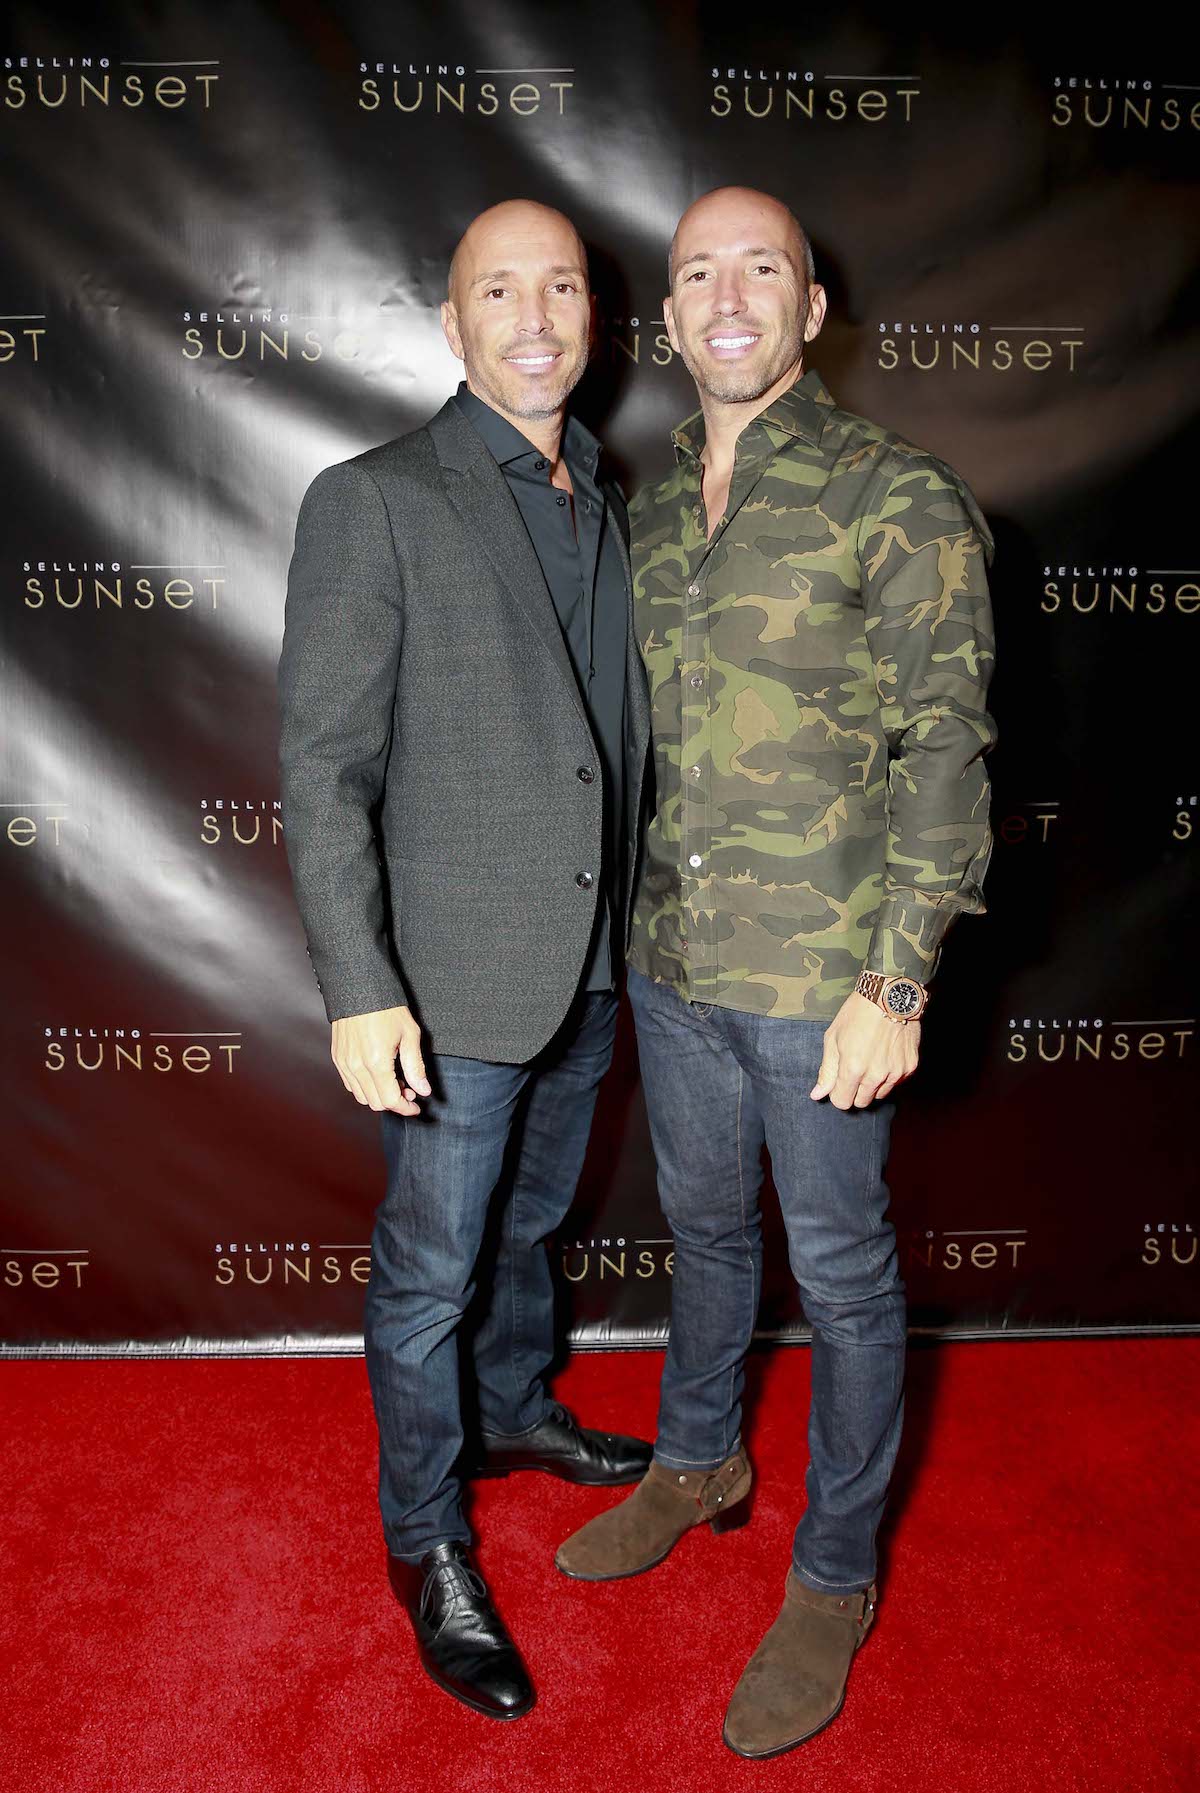 Brett Oppenheim and Jason Oppenheim attend Netflix's "Selling Sunset" launch party on March 23, 2019 in West Hollywood, California.